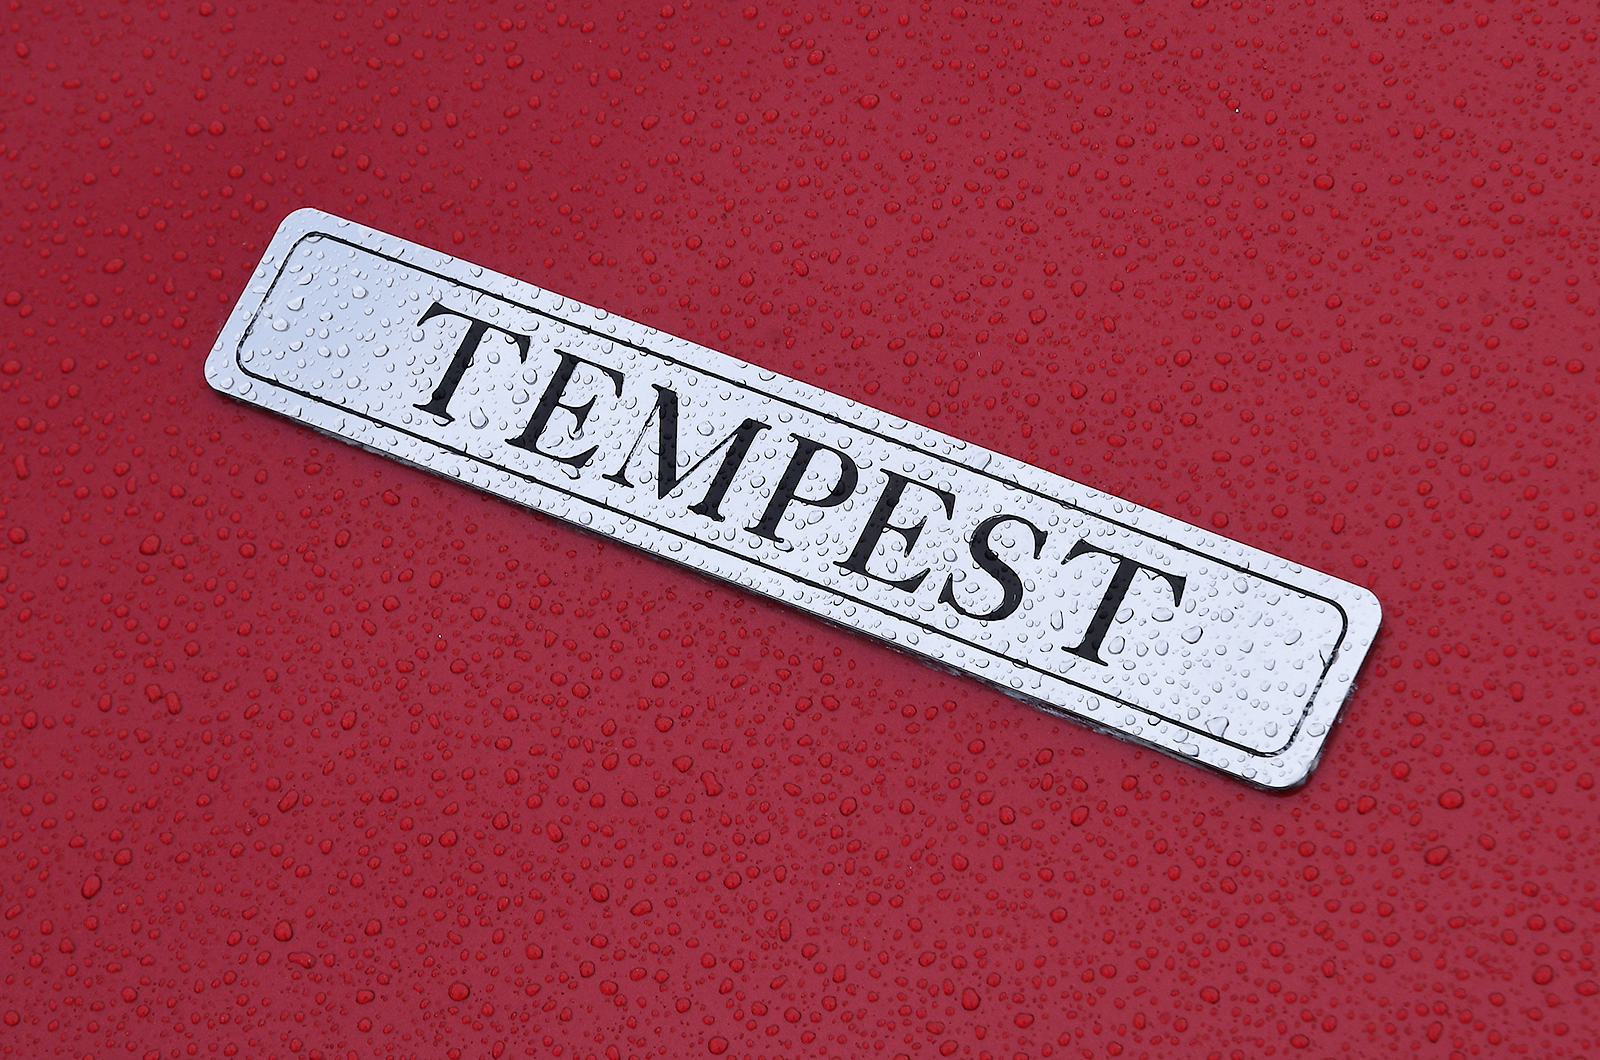 Classic & Sports Car – Jankel Tempest: the eye of the storm